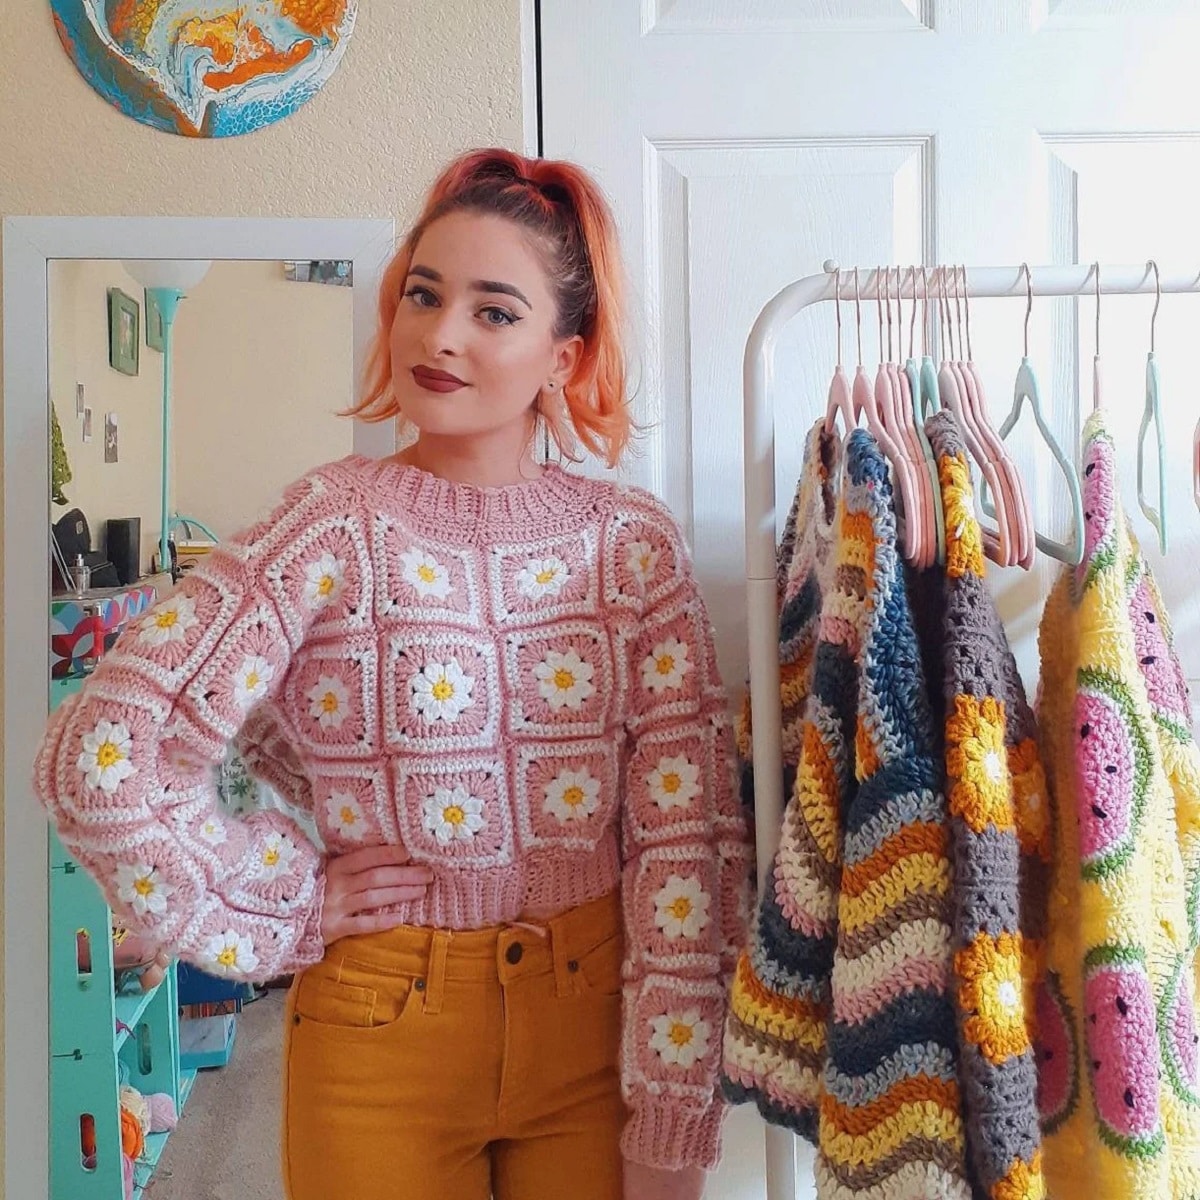 Redhead woman wearing a pink crochet sweater with white and yellow daisies in squares all over the sweater.